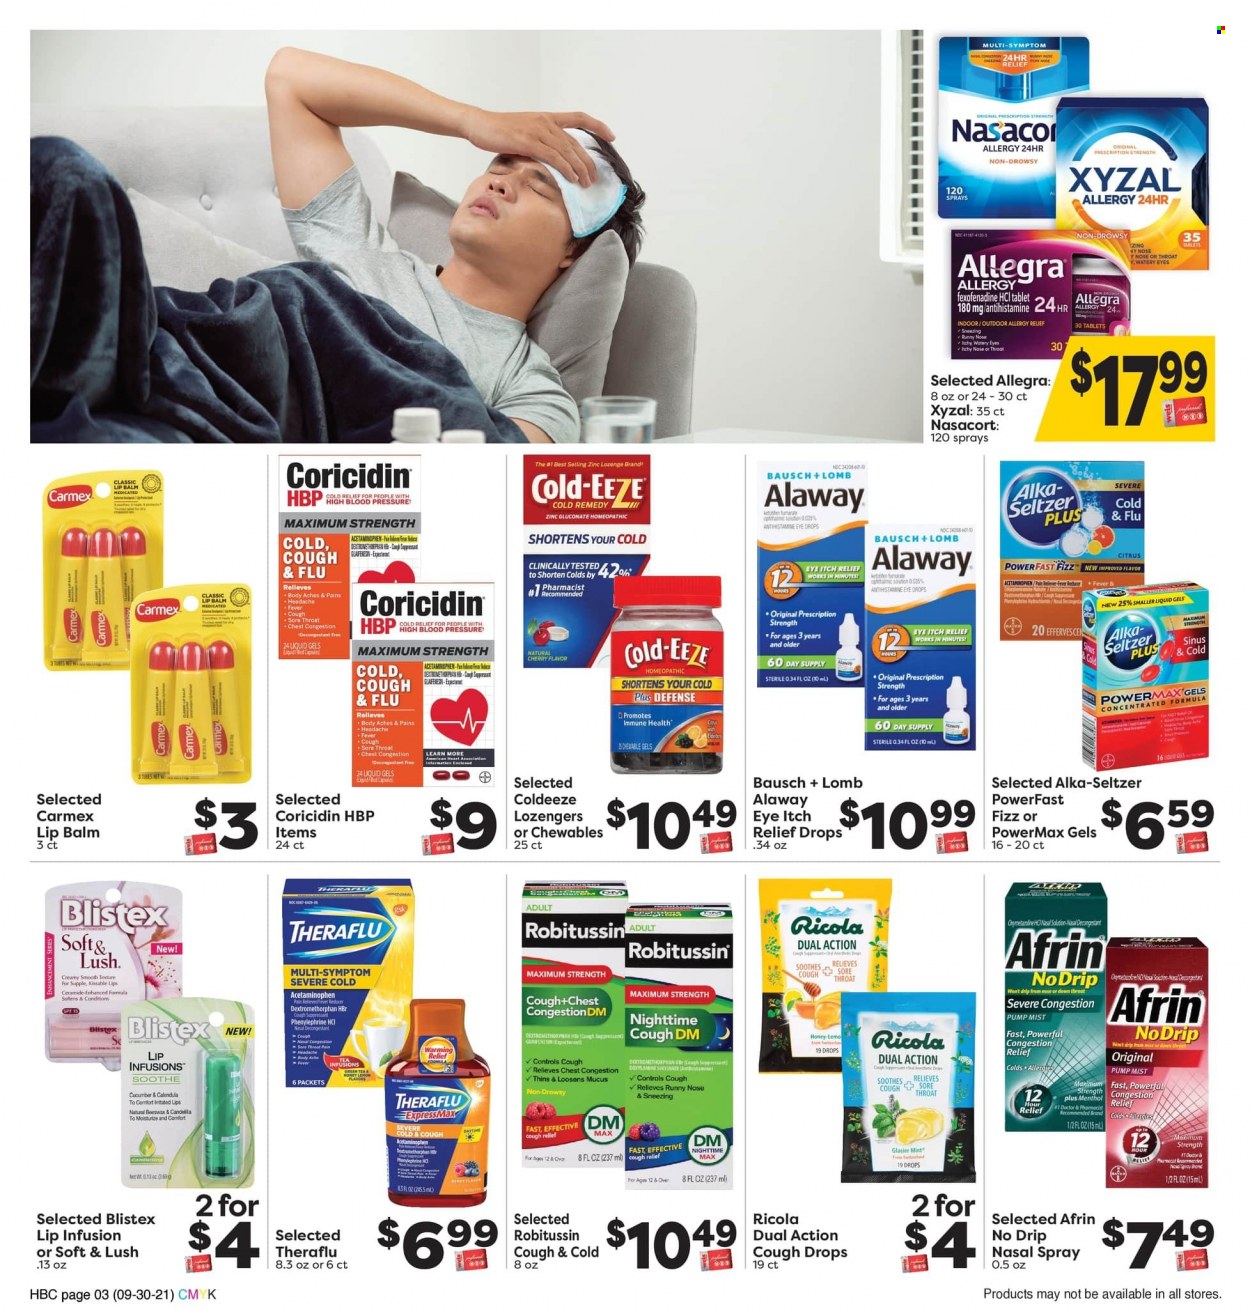 thumbnail - Weis Flyer - 09/30/2021 - 11/04/2021 - Sales products - cherries, ricola, Thins, honey, green tea, tea, lip balm, cup, Afrin, Coricidin, Cold & Flu, Robitussin, Theraflu, eye drops, zinc, Alka-seltzer, cough drops, Cold-EEZE, nasal spray, allergy relief. Page 3.